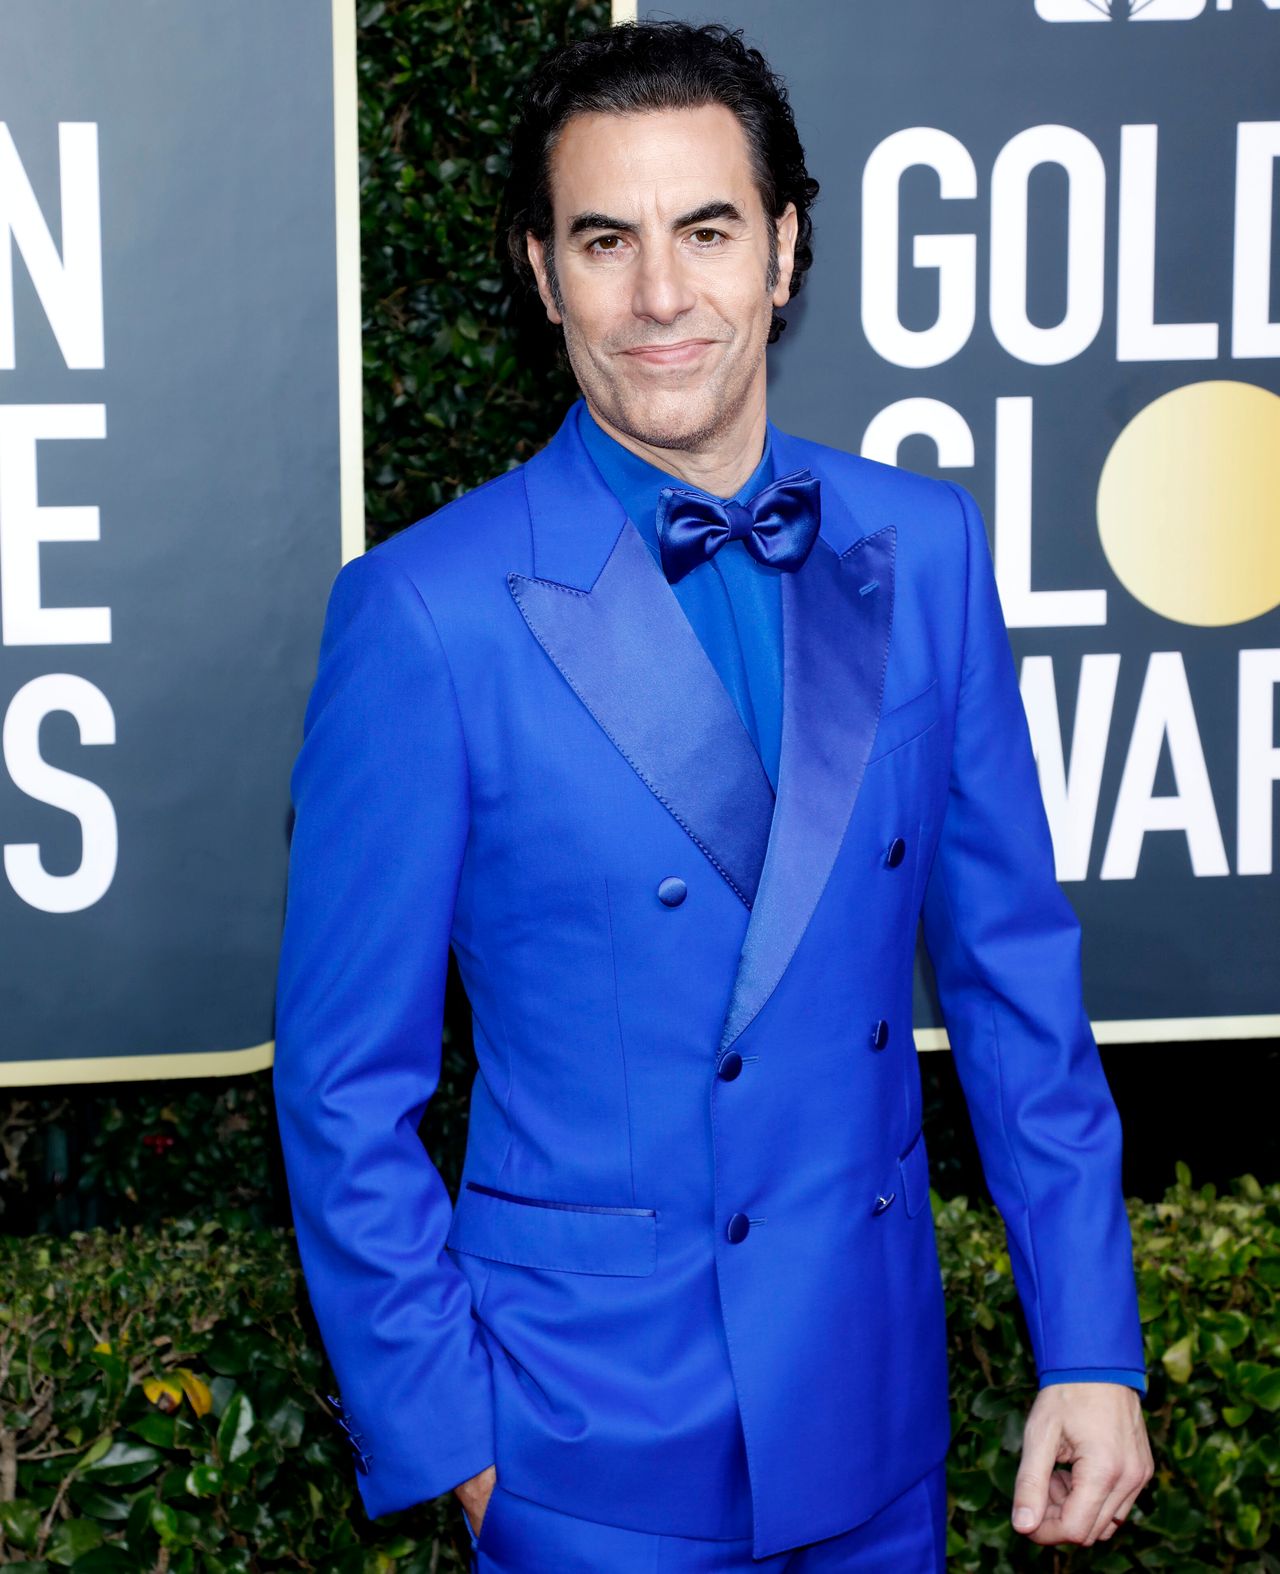 Sacha Baron Cohen photographed on the red carpet of the 77th Annual Golden Globe Awards in January 2020